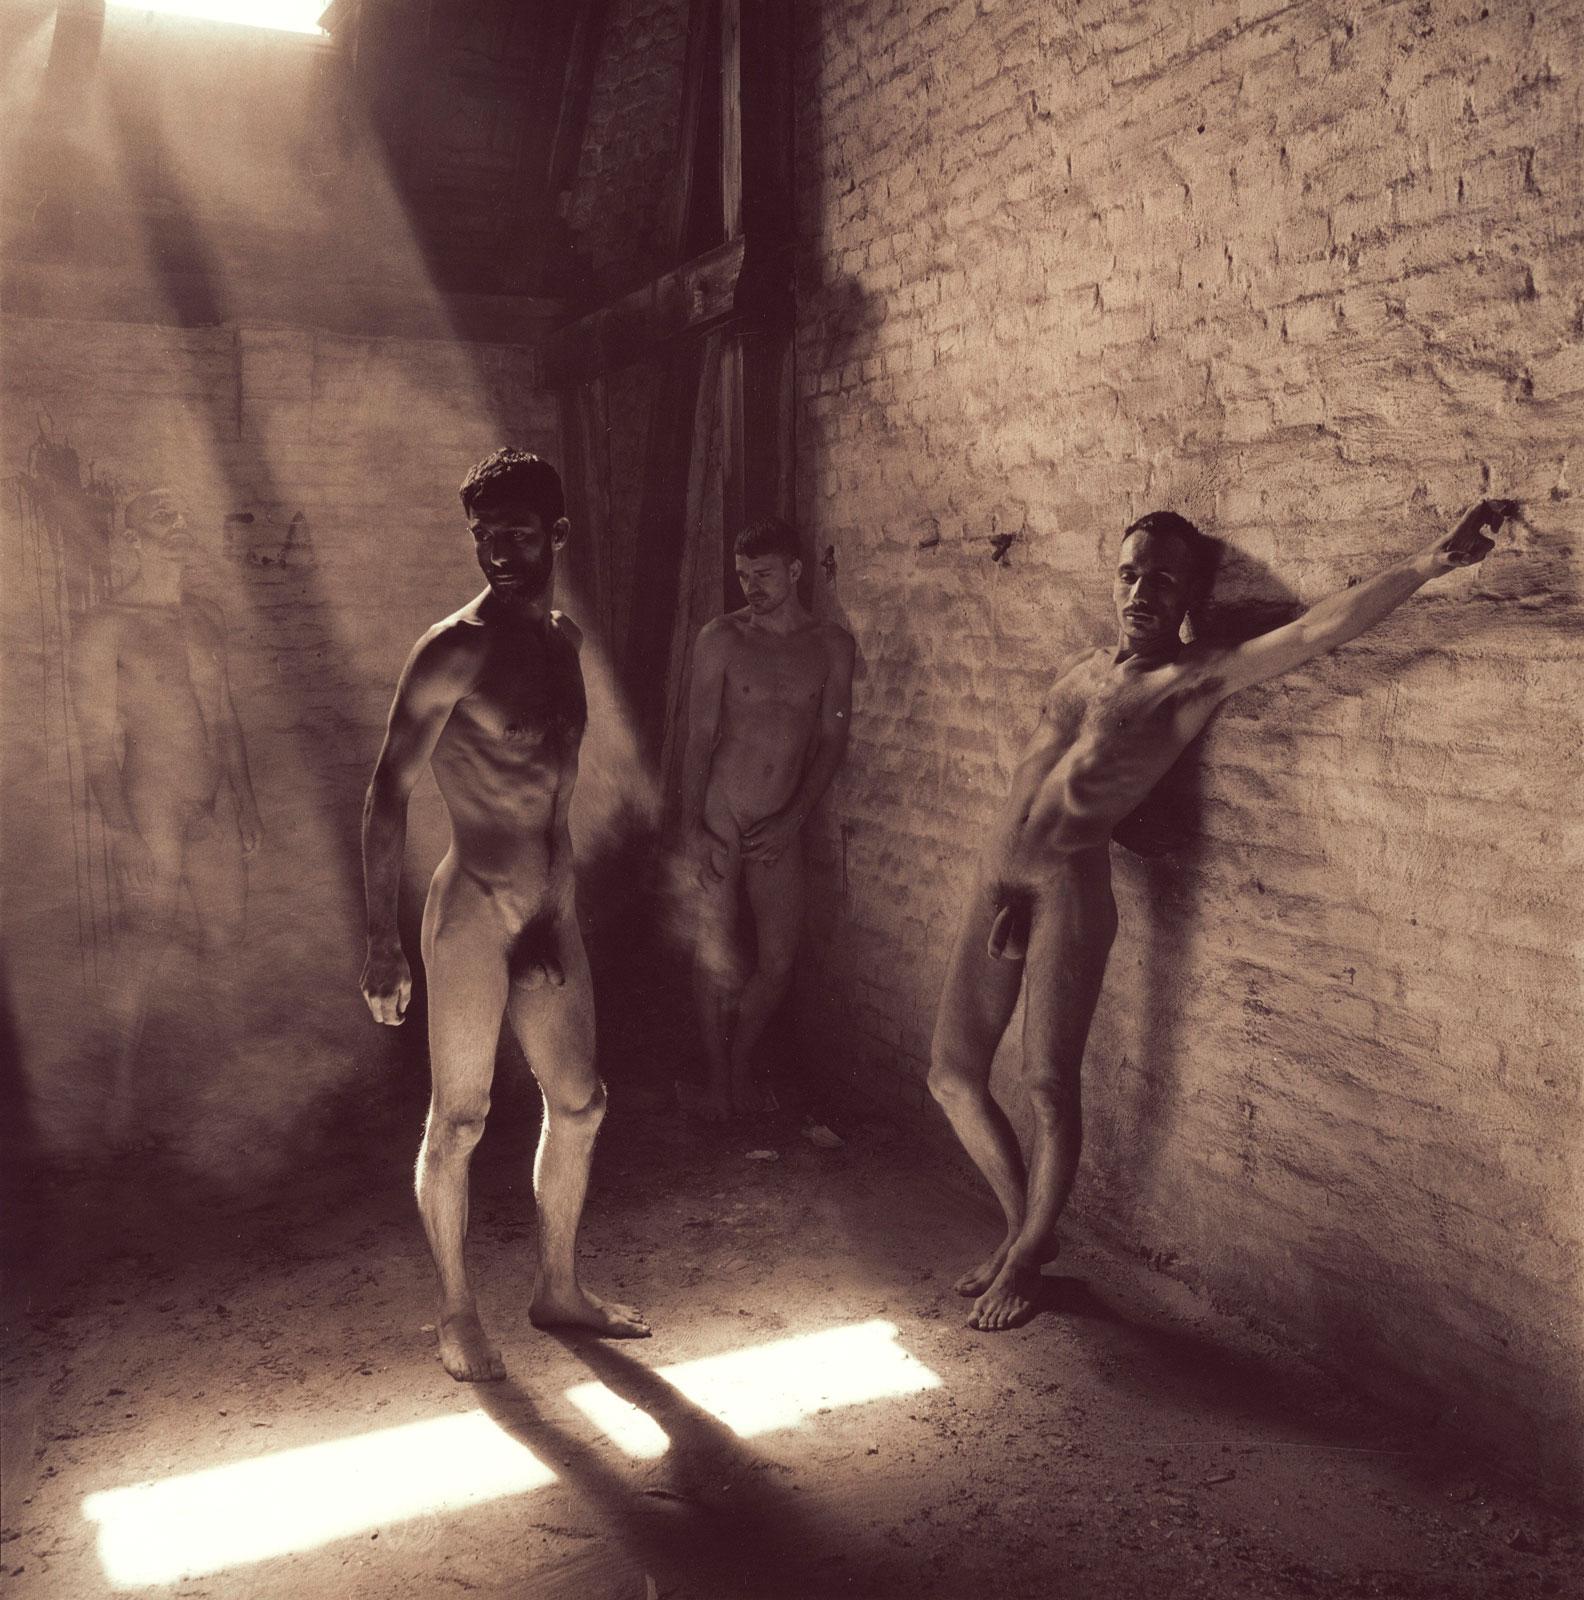 Daniel Kane Nude Photograph - Brandenburg 2010 (Real Nude Soldiers Haunted by Ghostly Spirits of Past)